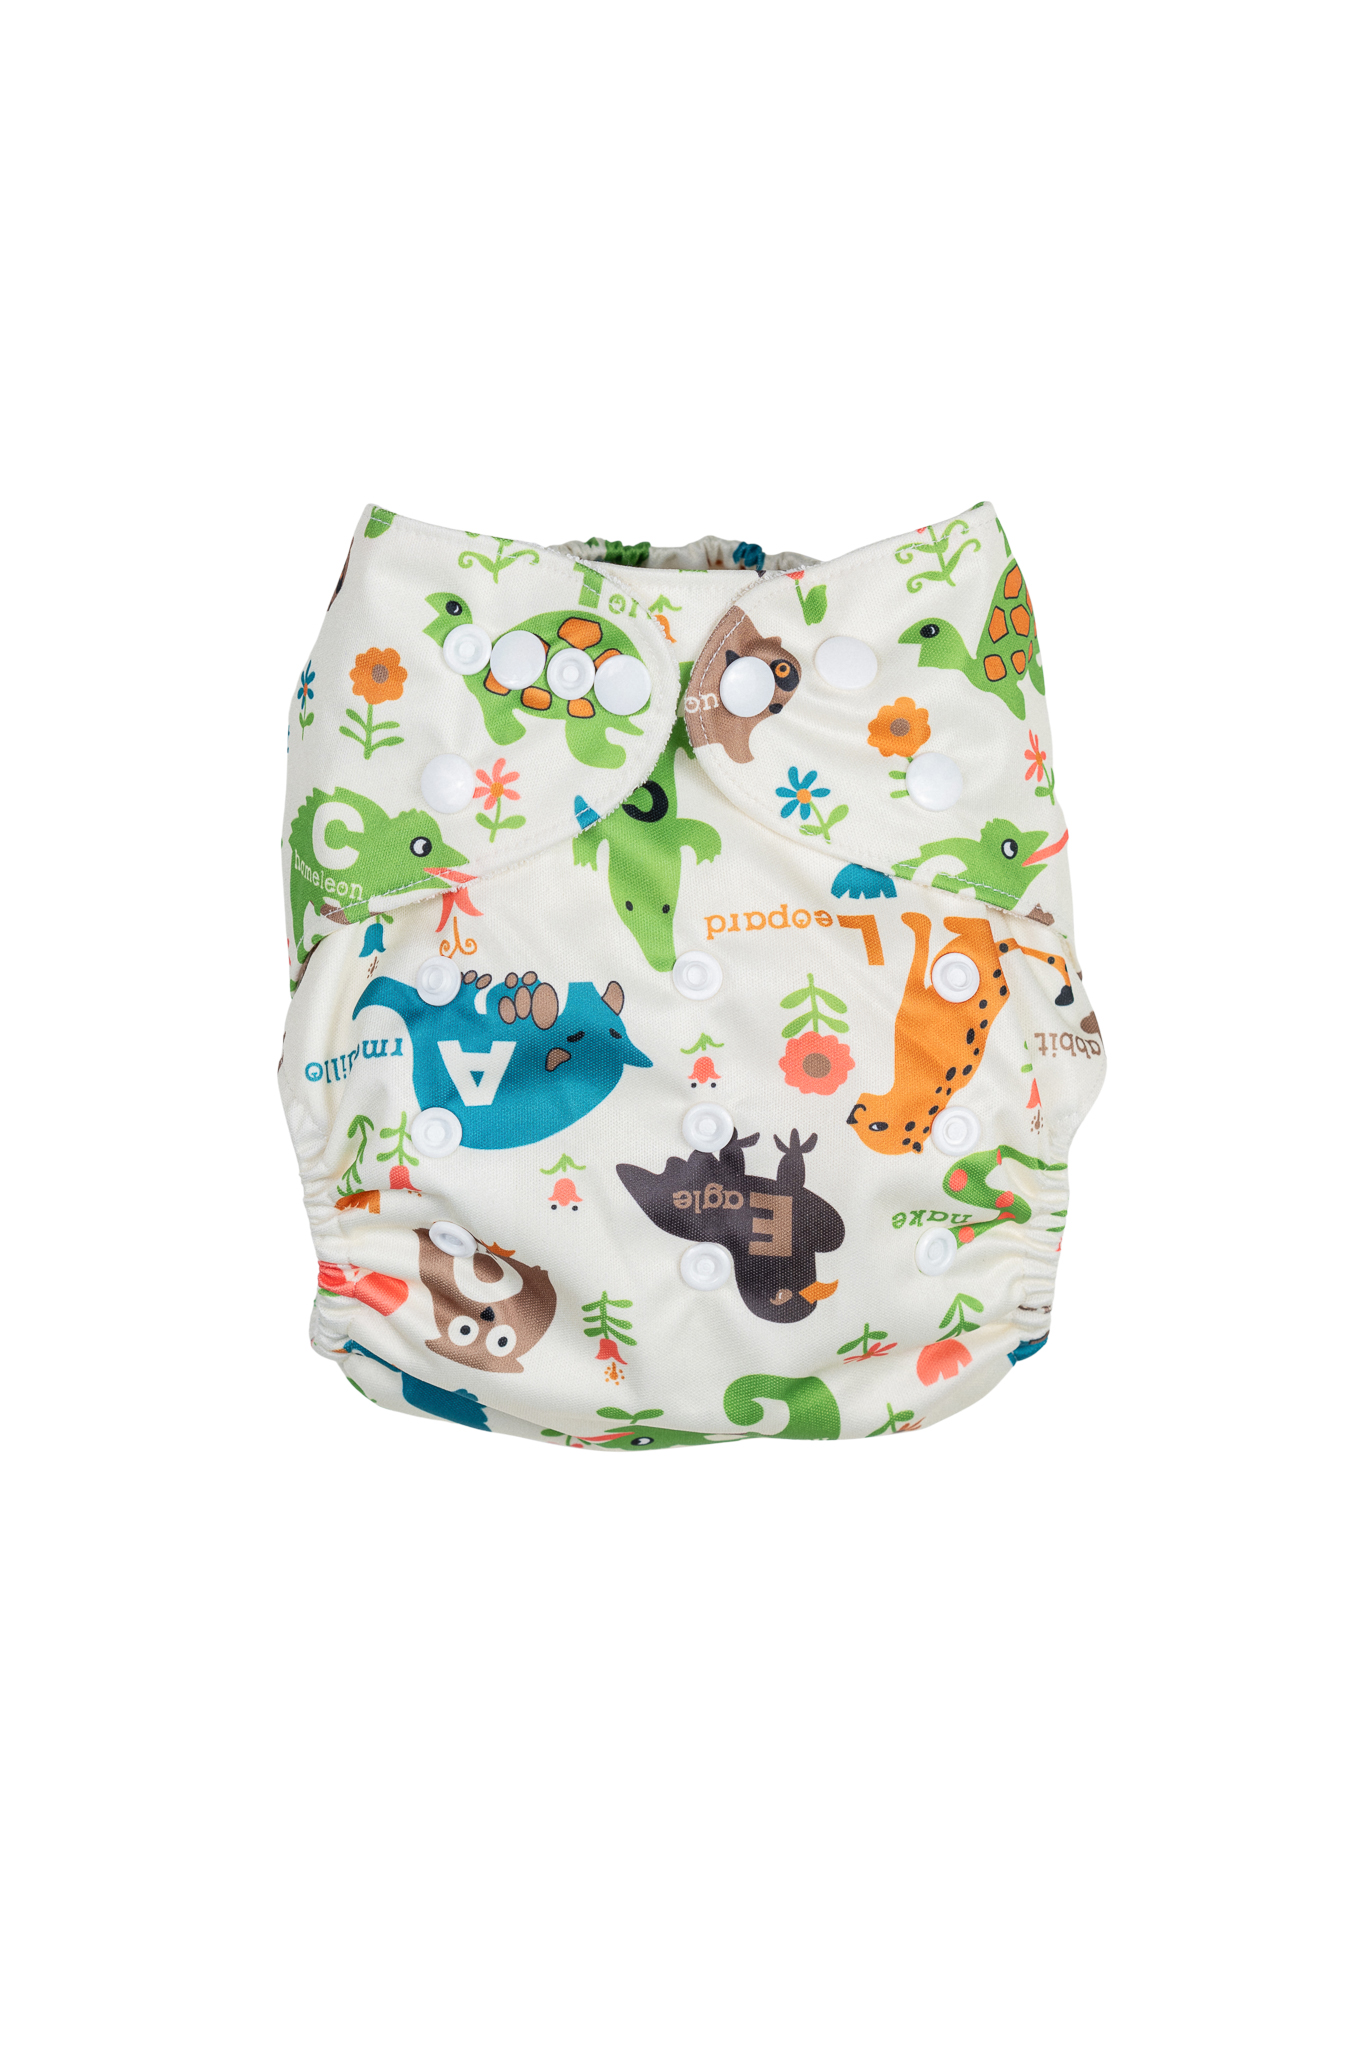 Bamboo Size-Adjustable Cloth Nappy - Playful Animals,Bamboo Size-Adjustable Cloth Nappy - Playful Animals